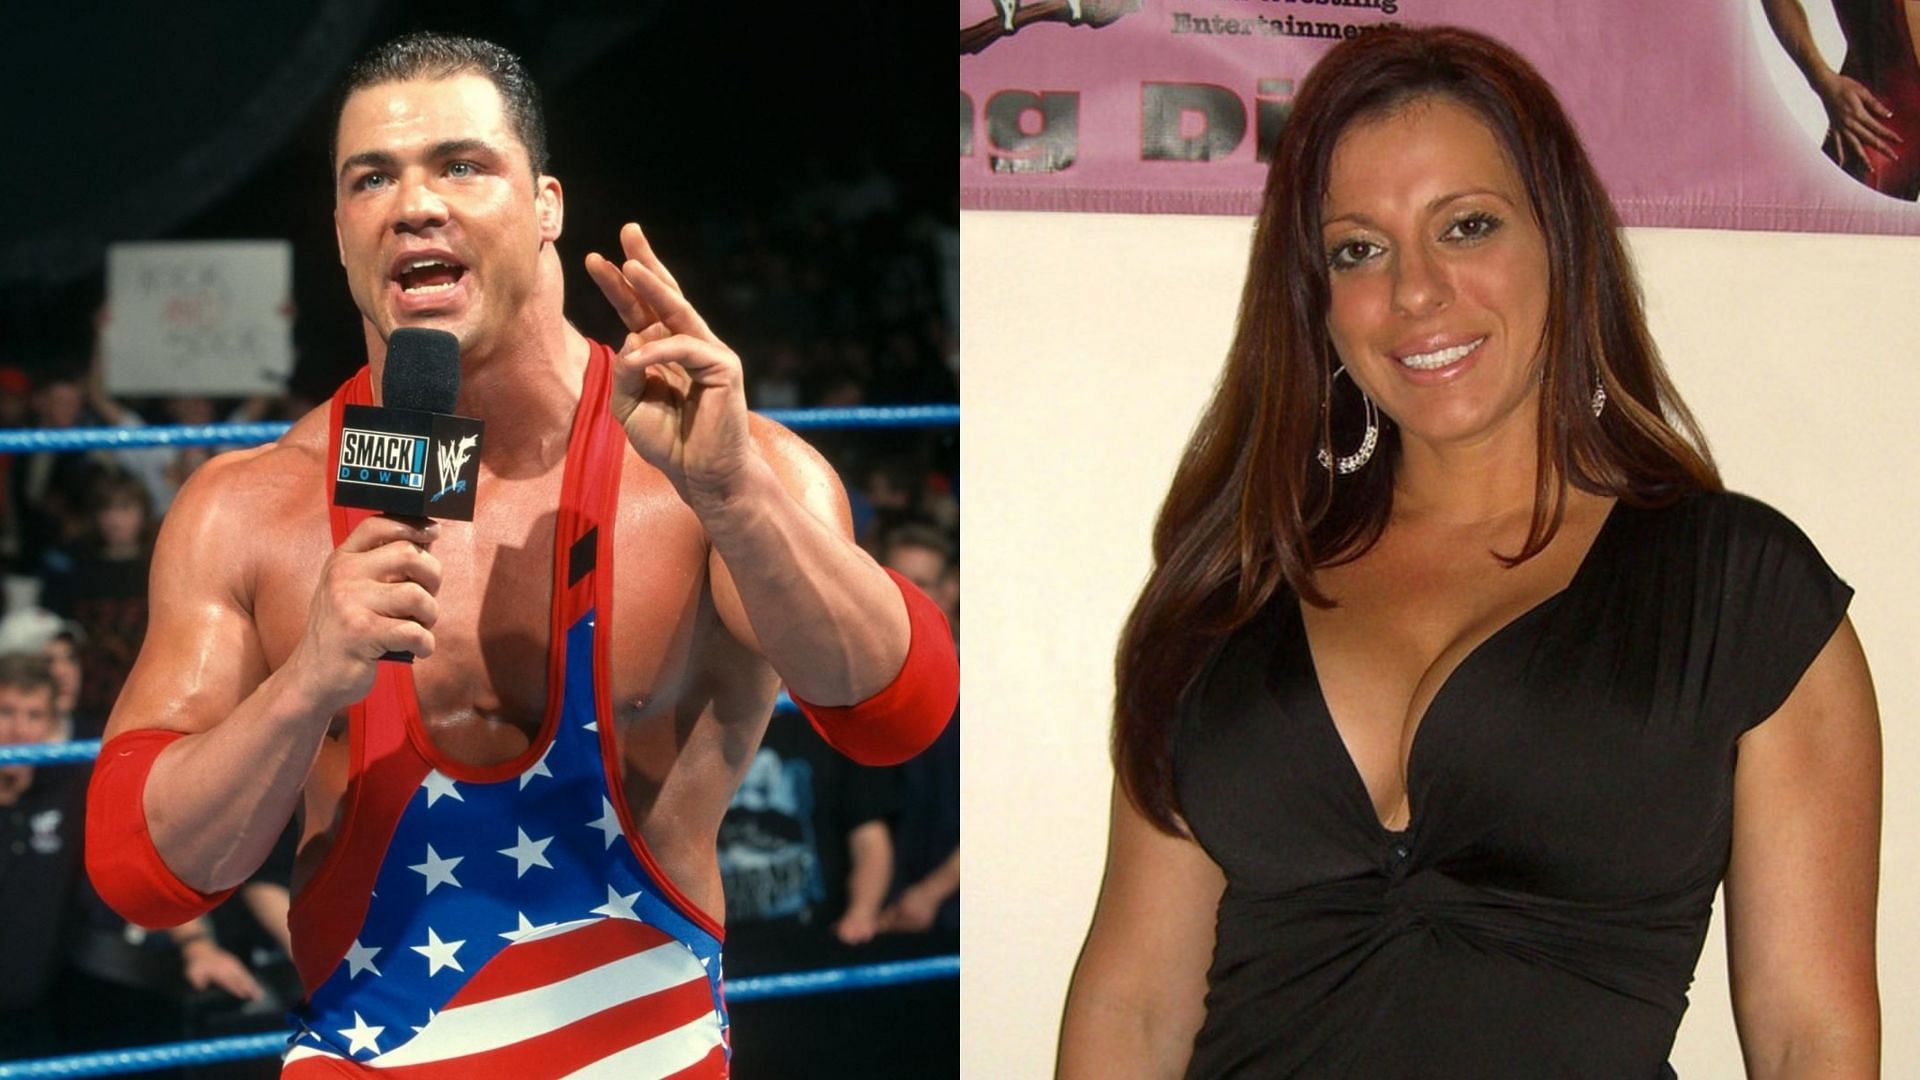 Kurt Angle (left) and Dawn Marie (right)